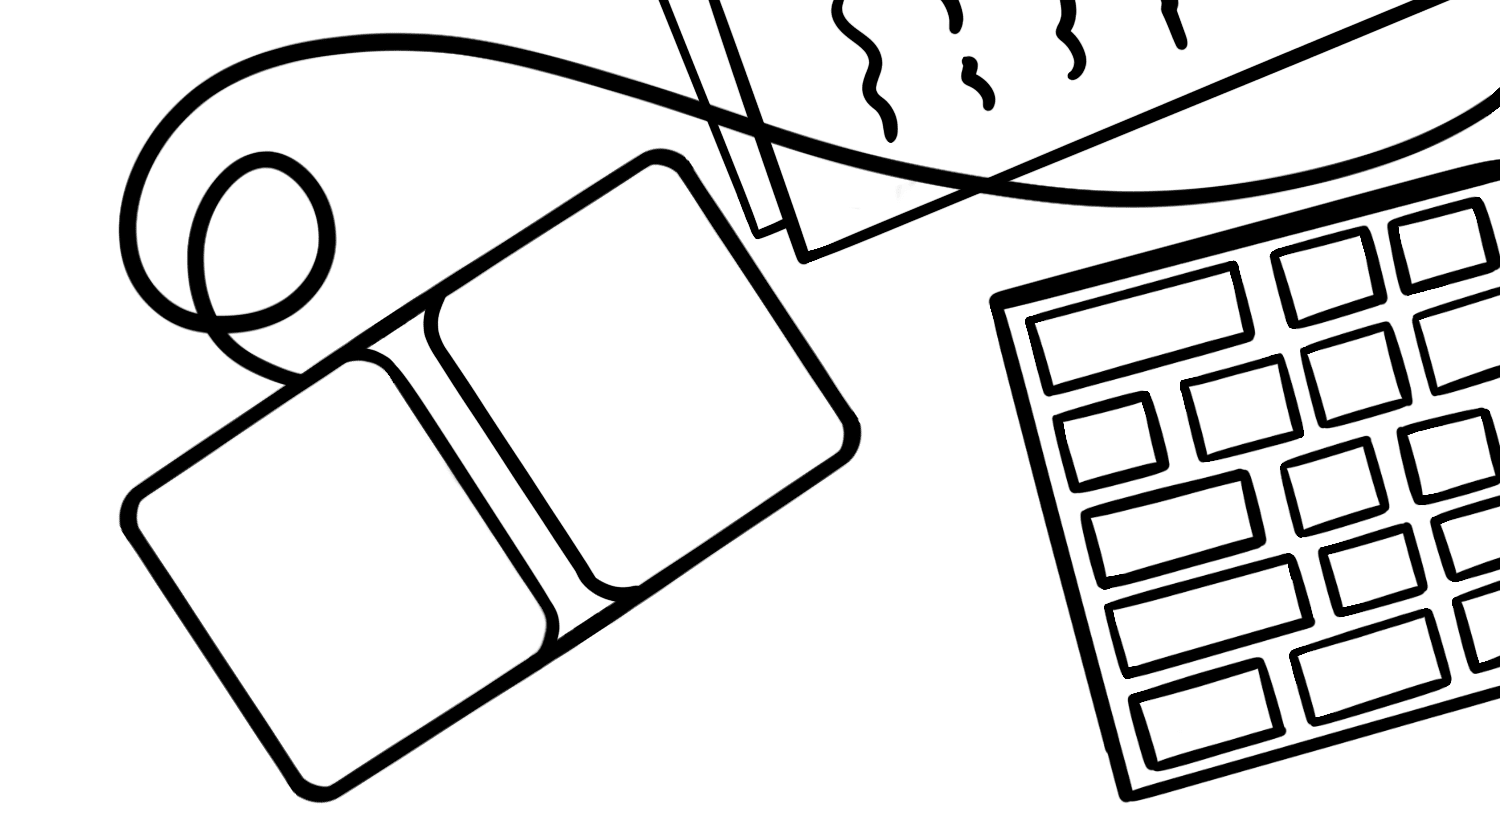 Illustration: A switch system device consisting of two large buttons sits beside a desktop keyboard, representing alternative navigation used by those with movement-limiting disabilities.